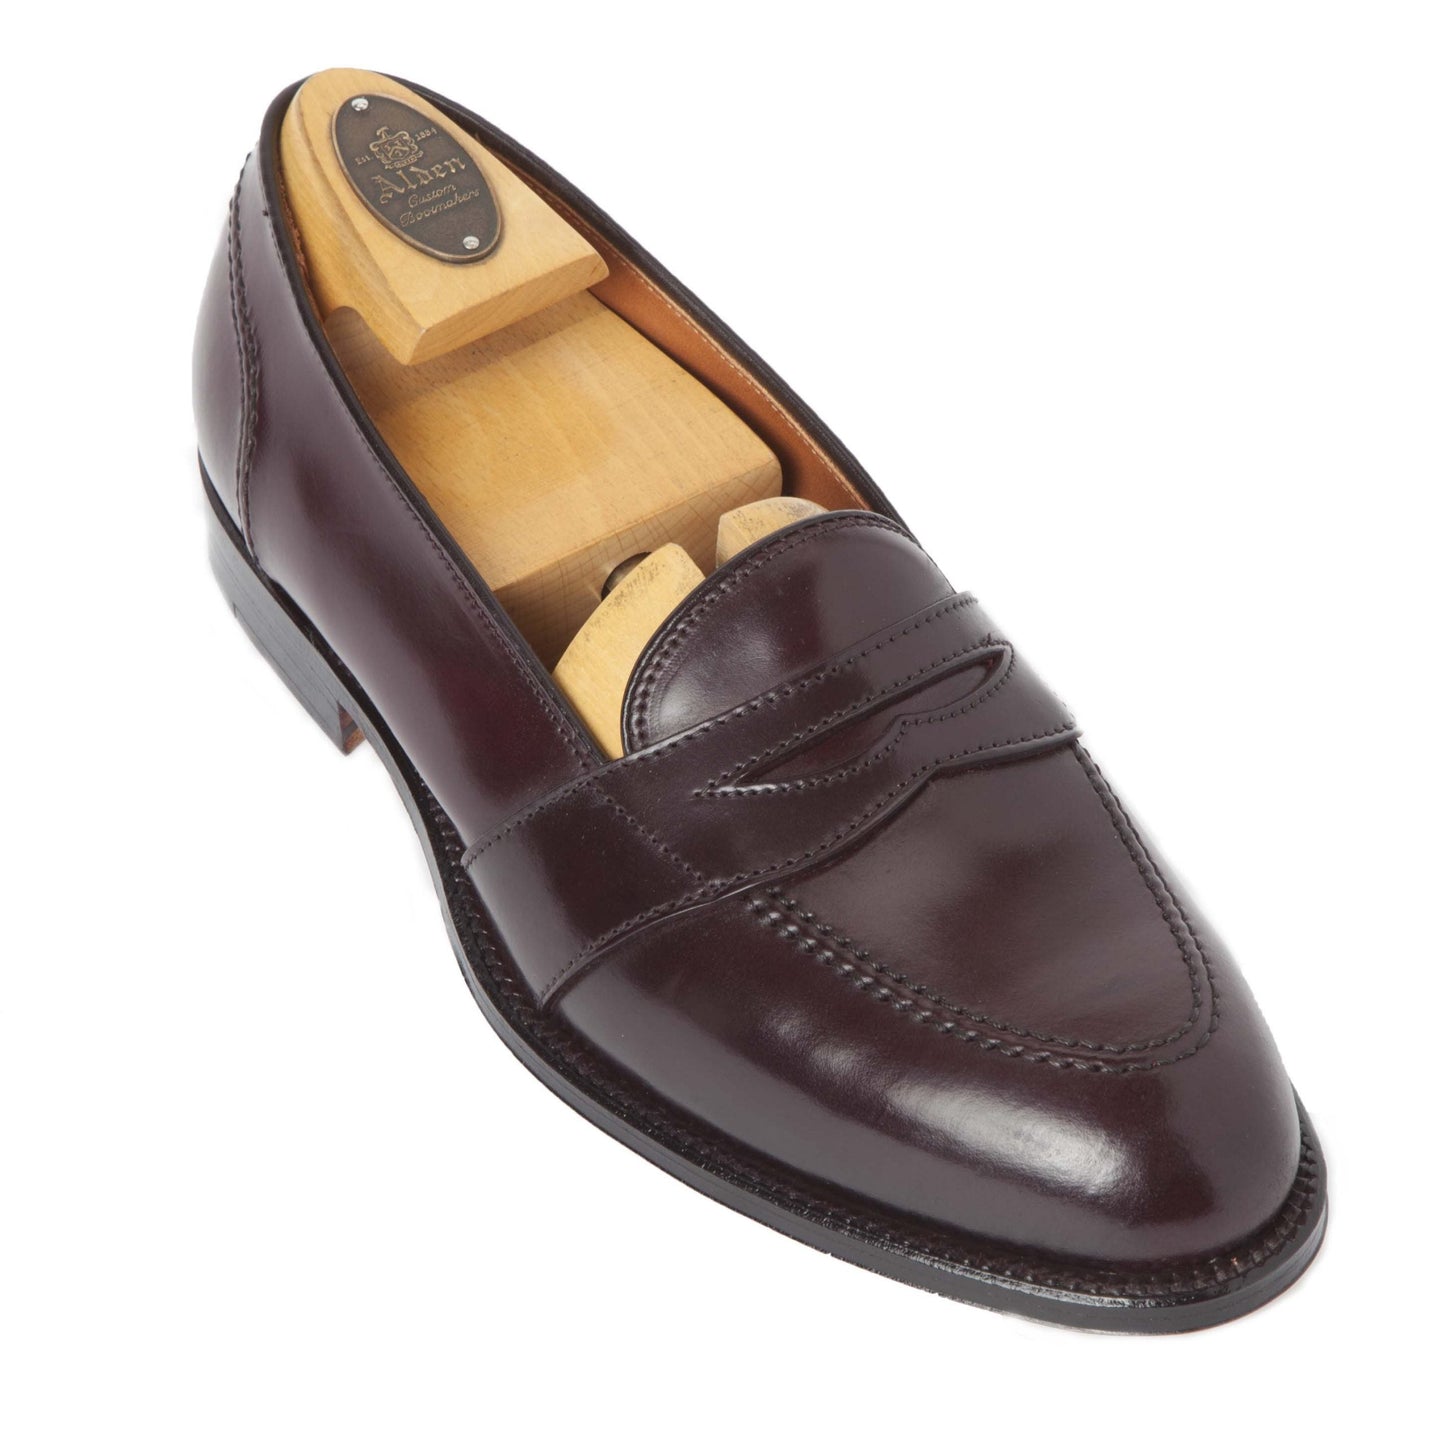 684 - Full Strap Loafer in Color 8 Shell